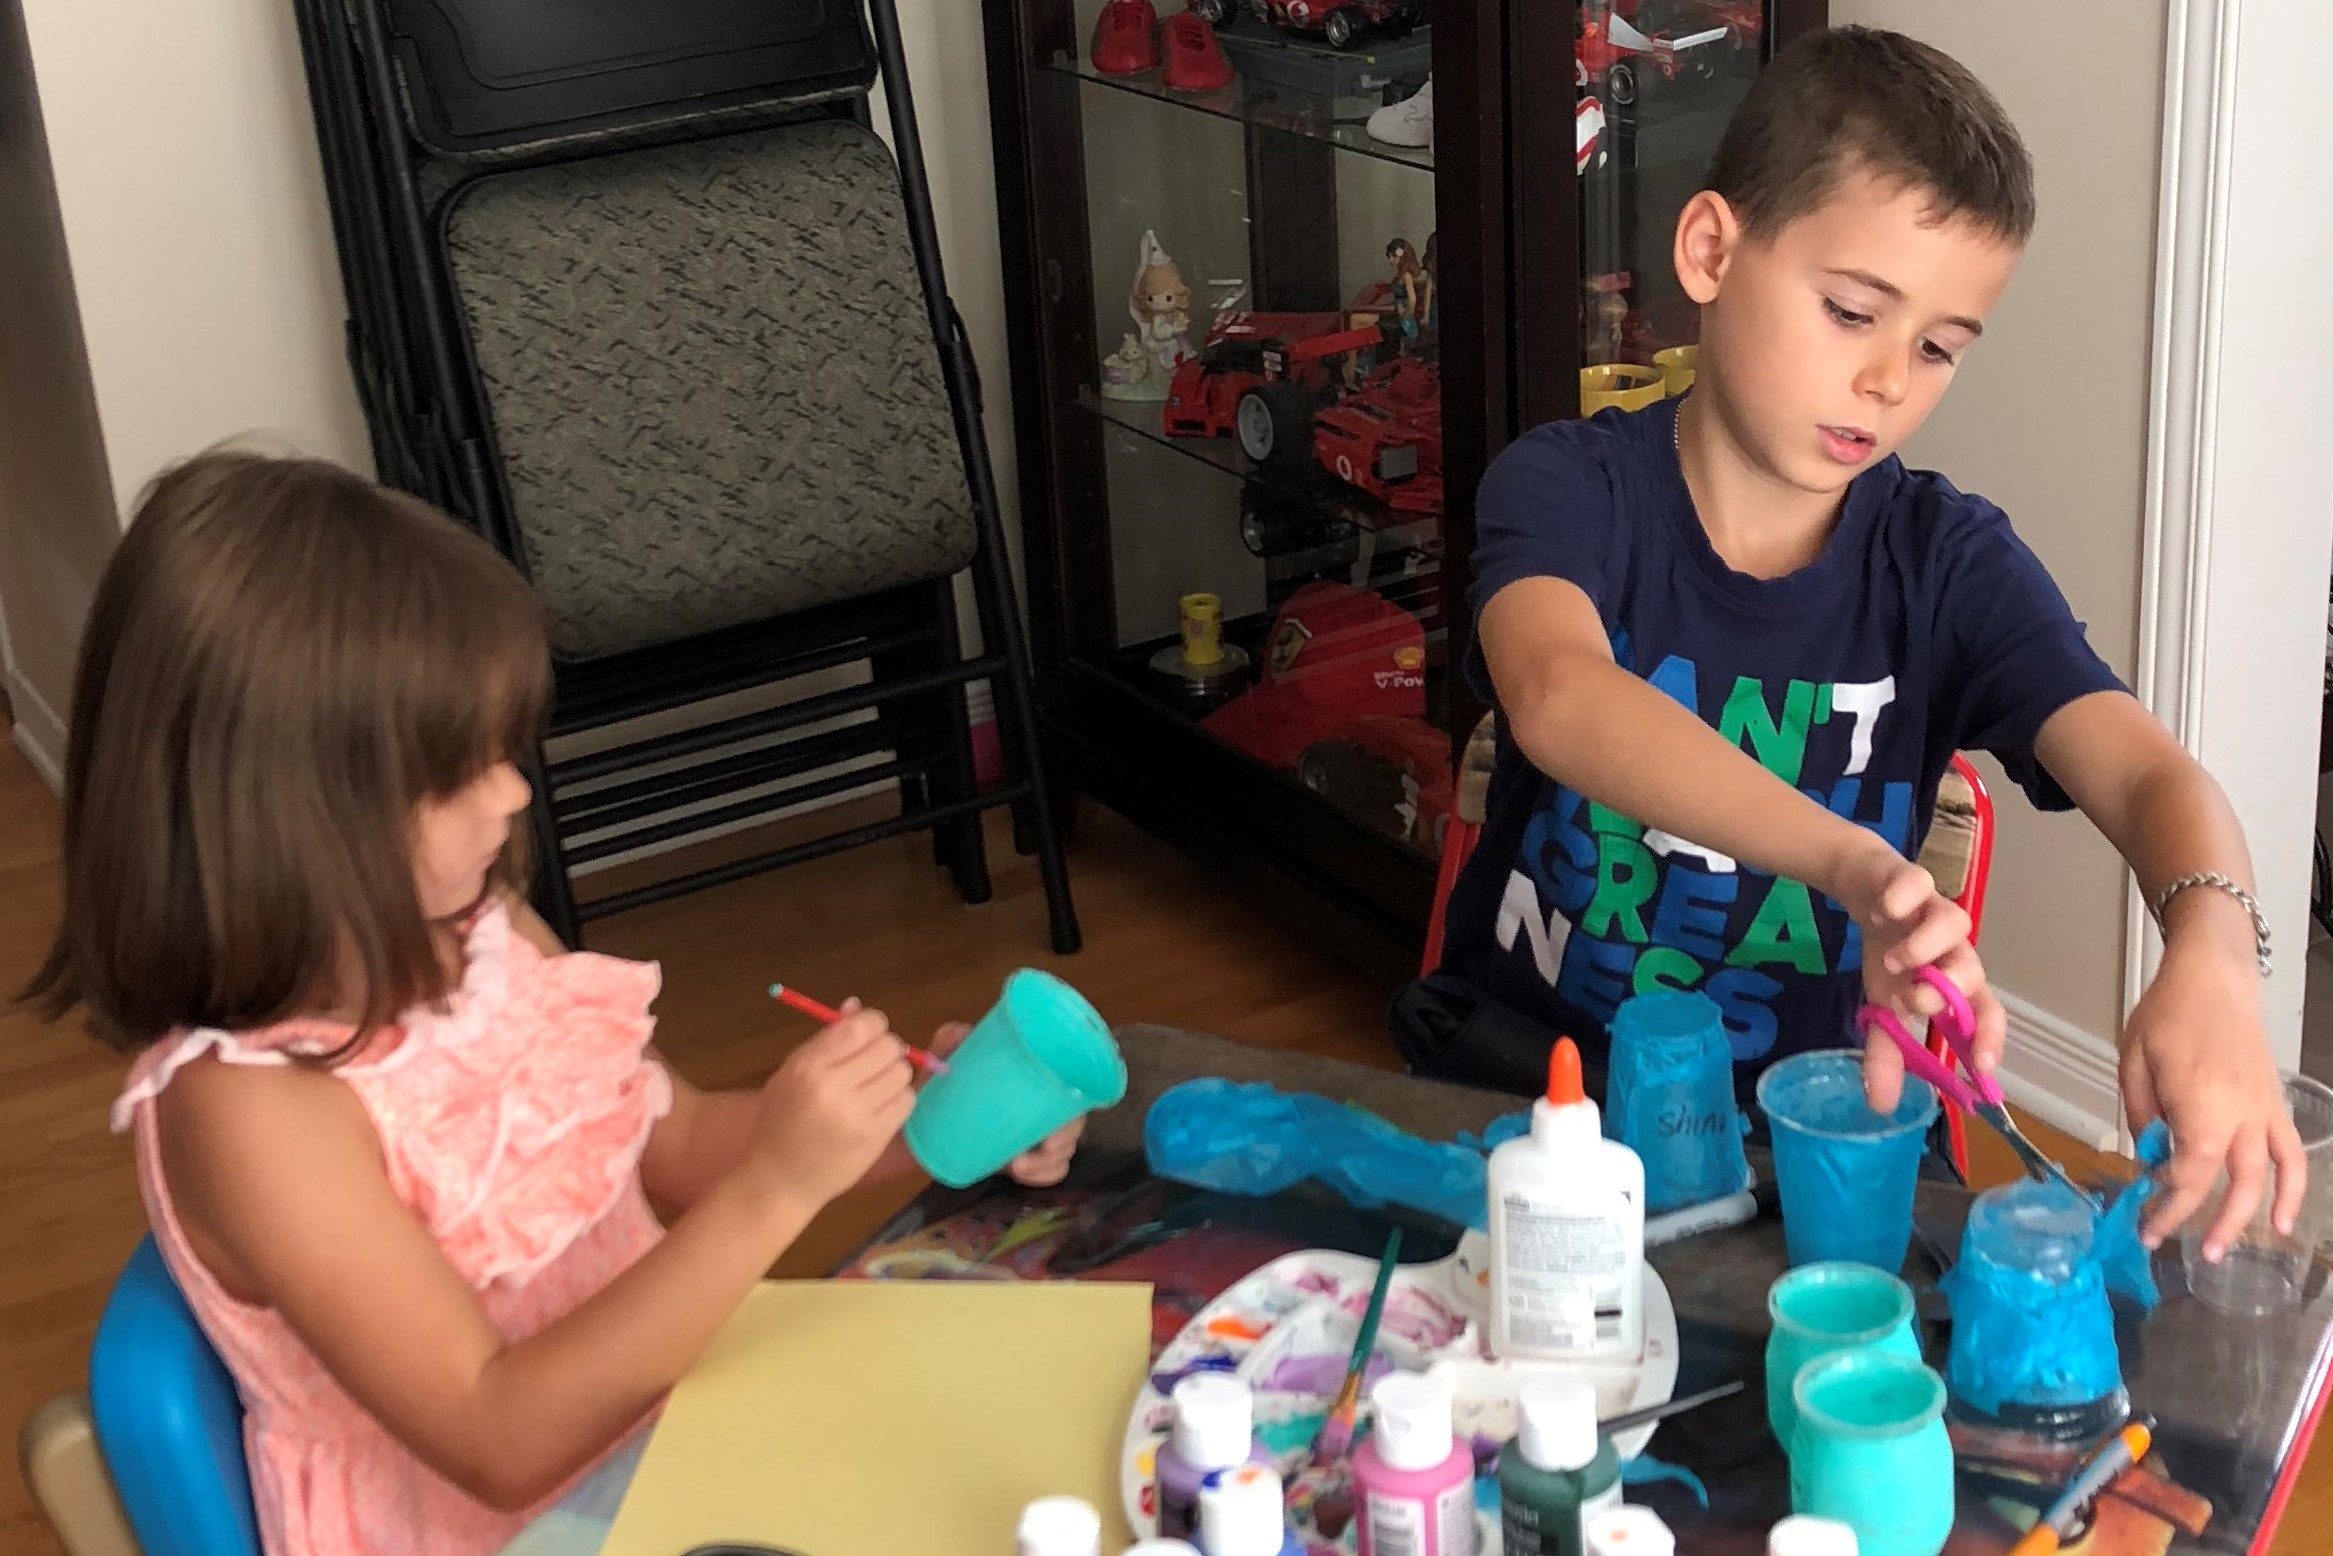 Adriana and Christian D. painting and making teal light crafts